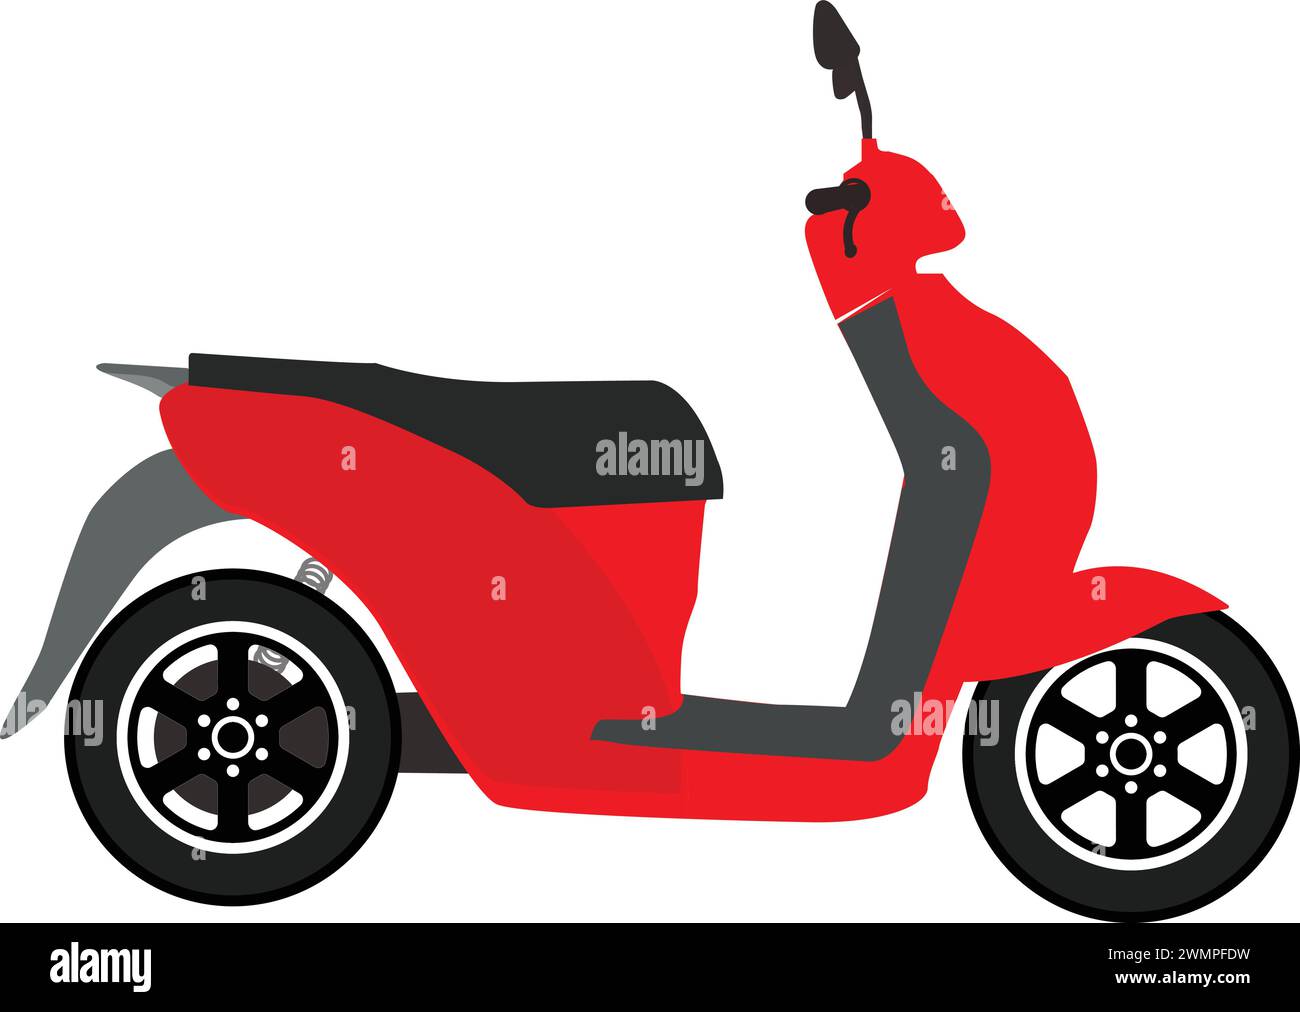 Red scooty vector icon, Scooter Illustration icon Stock Vector